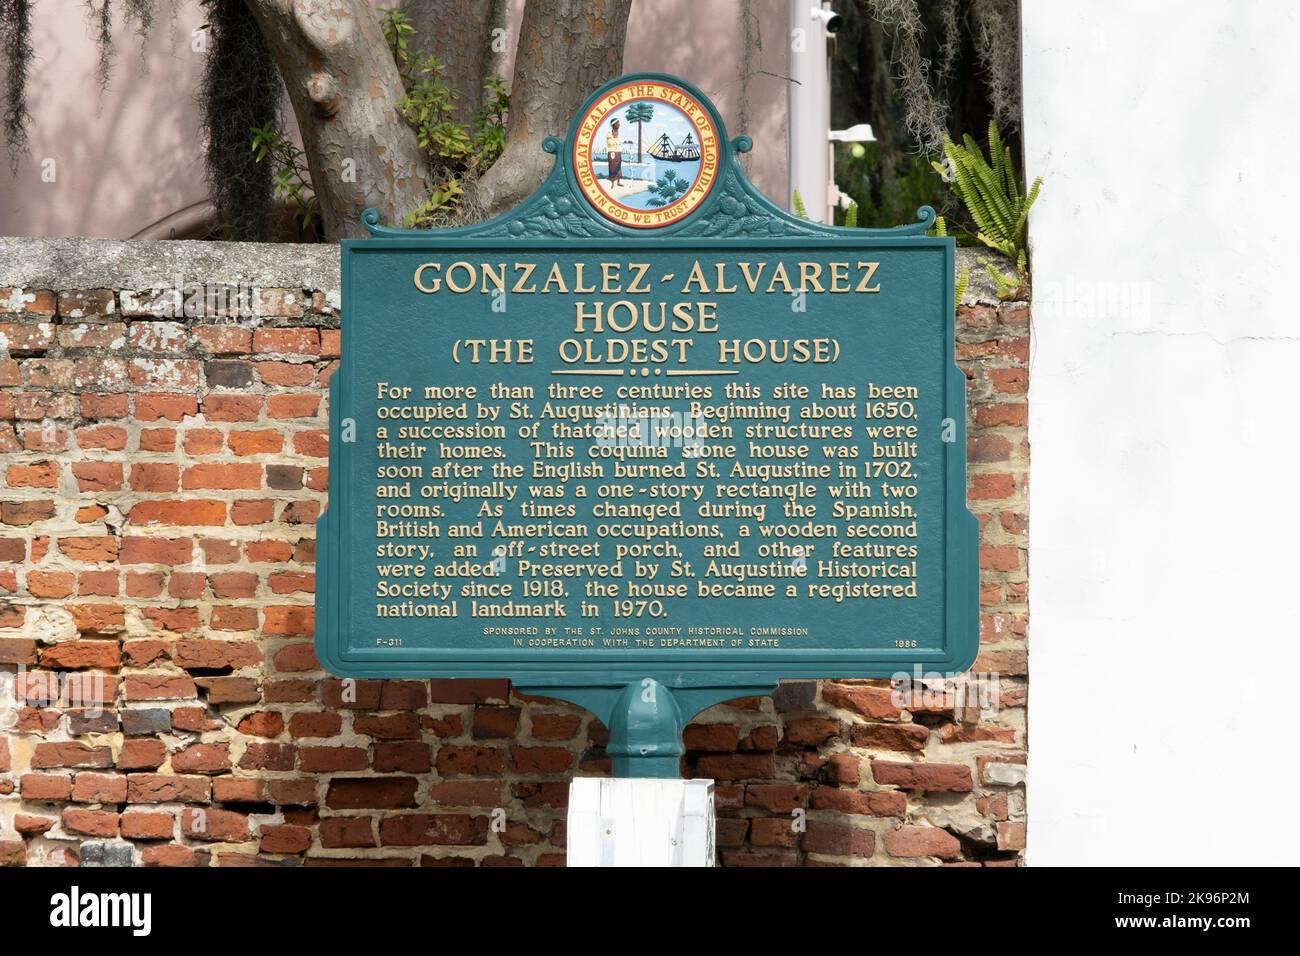 Metal Florida State sign marking the location of The Oldest House in St. Augustine, Florida: Gonzalez-Alvarez House. Stock Photo